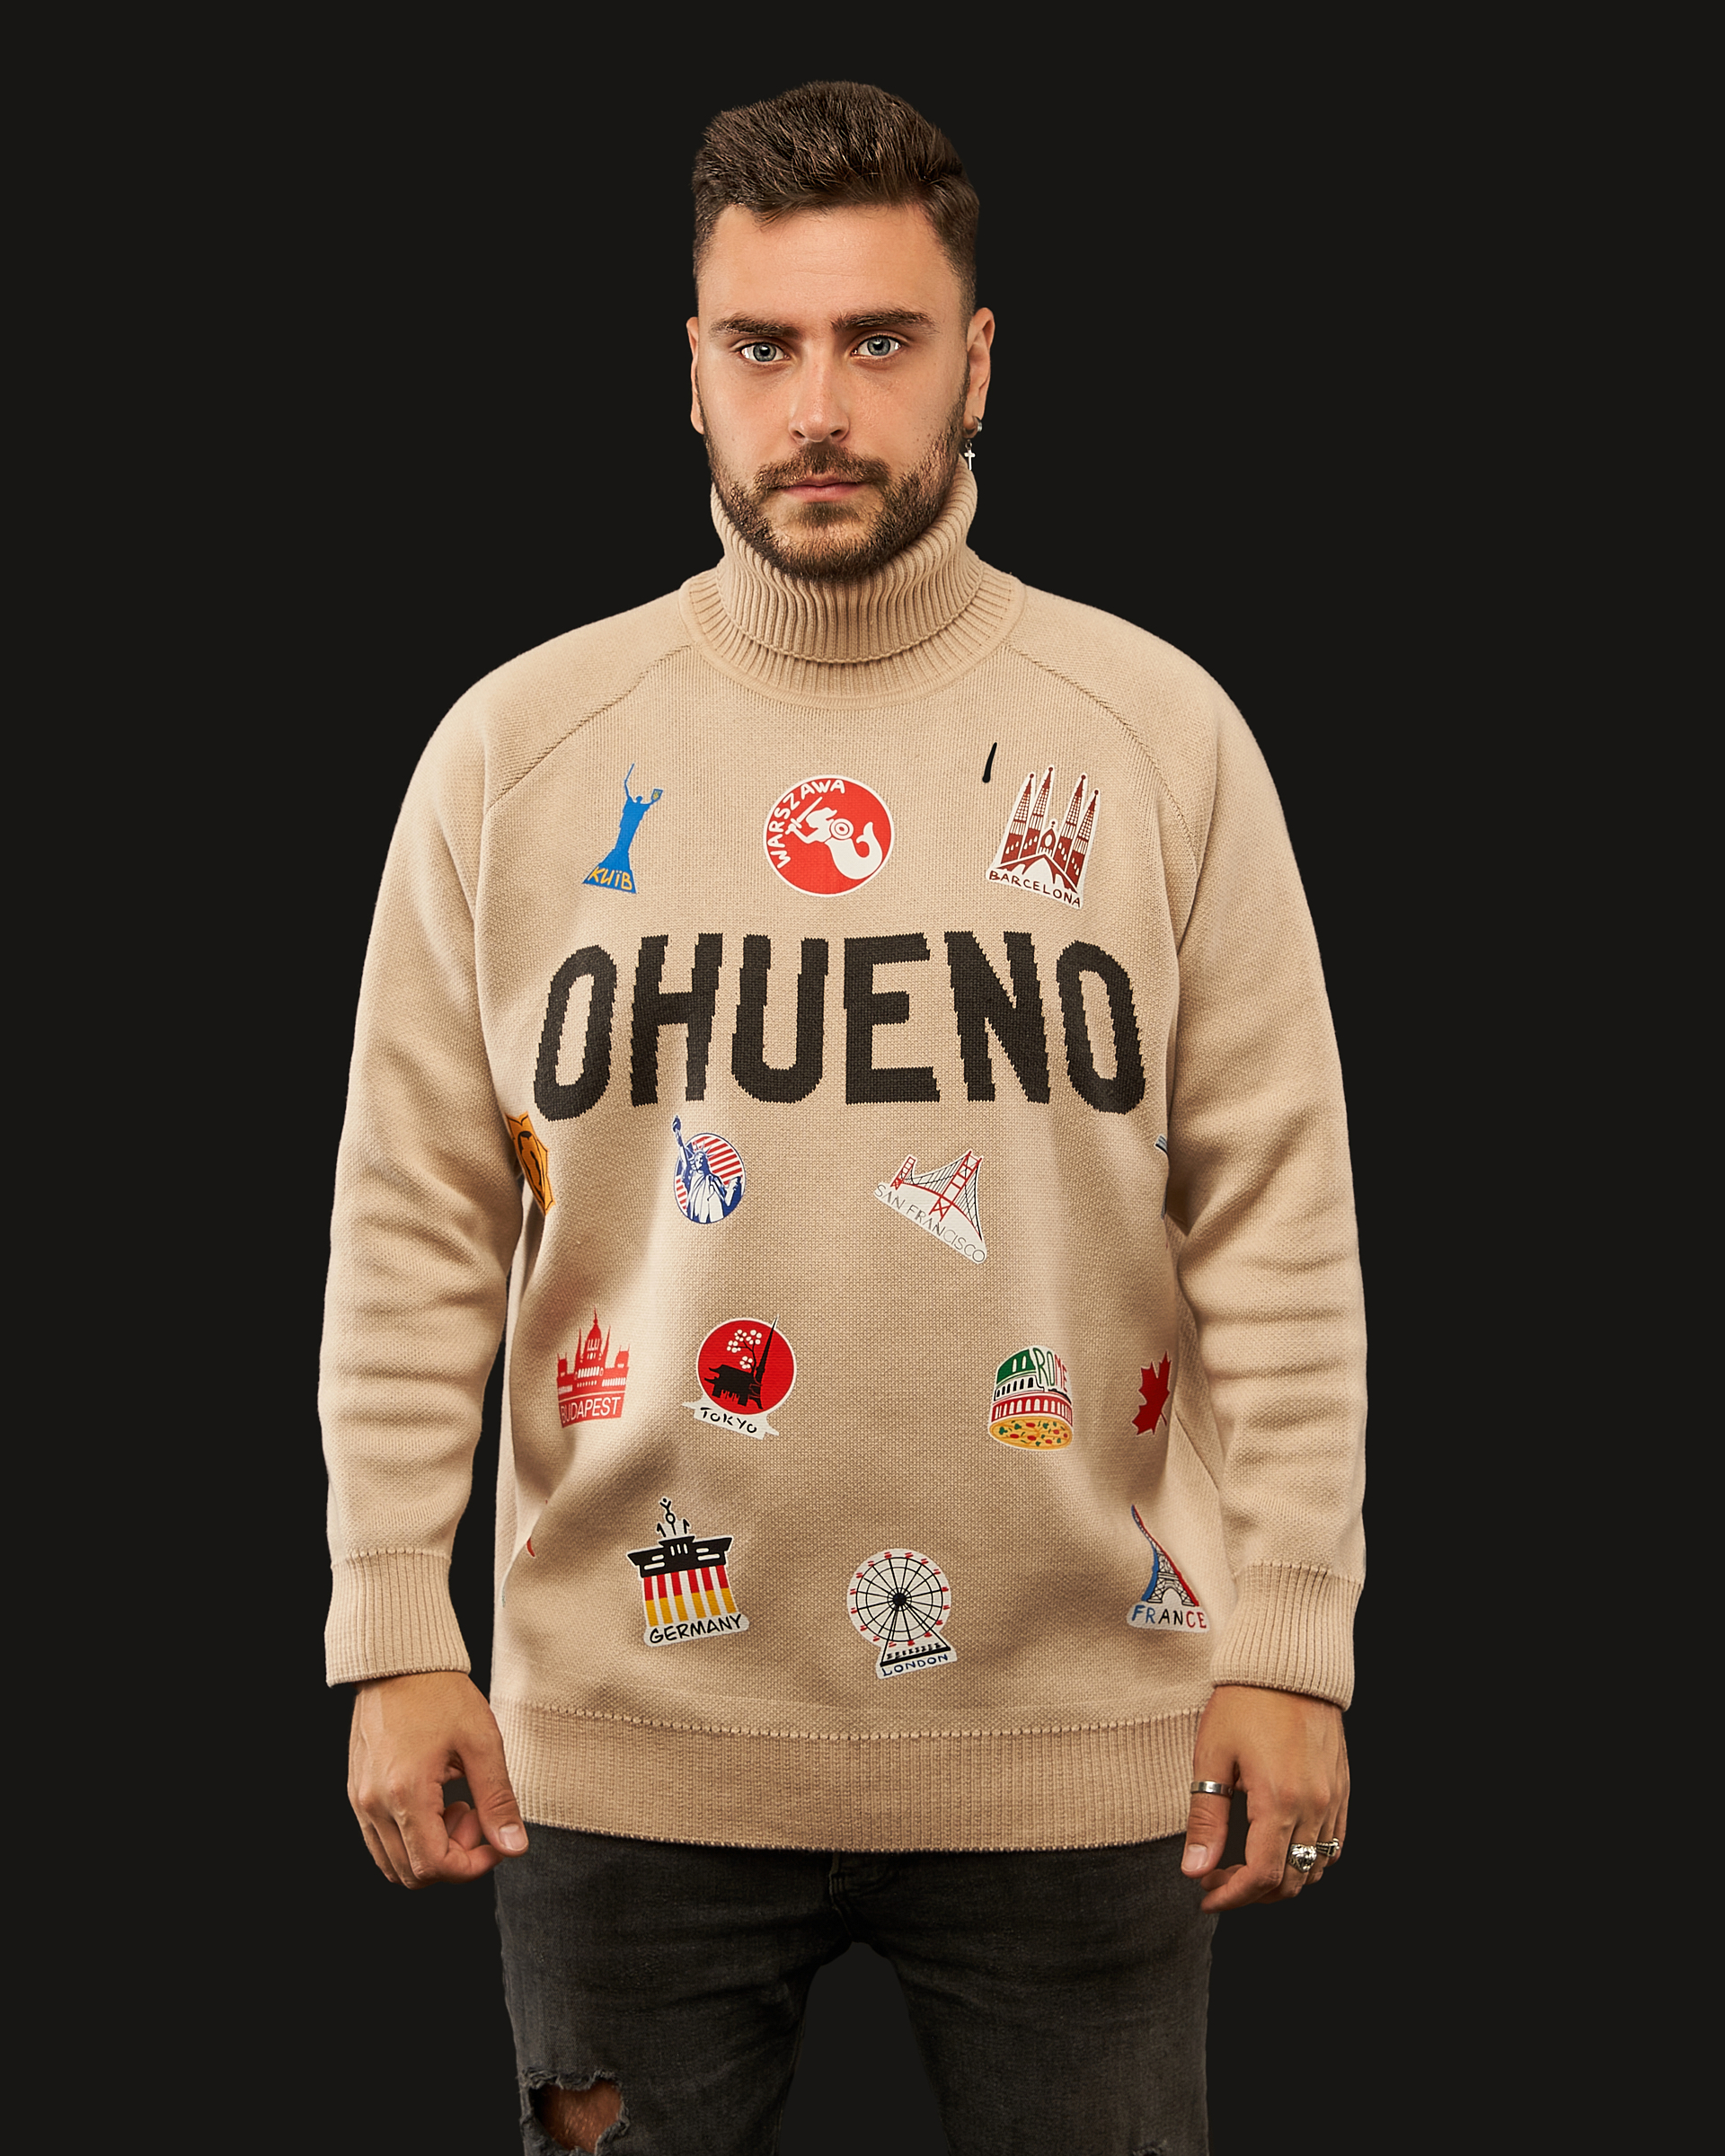 Pullover (beige) Image: https://ohueno-official.com/wp-content/uploads/m01948-1.jpg